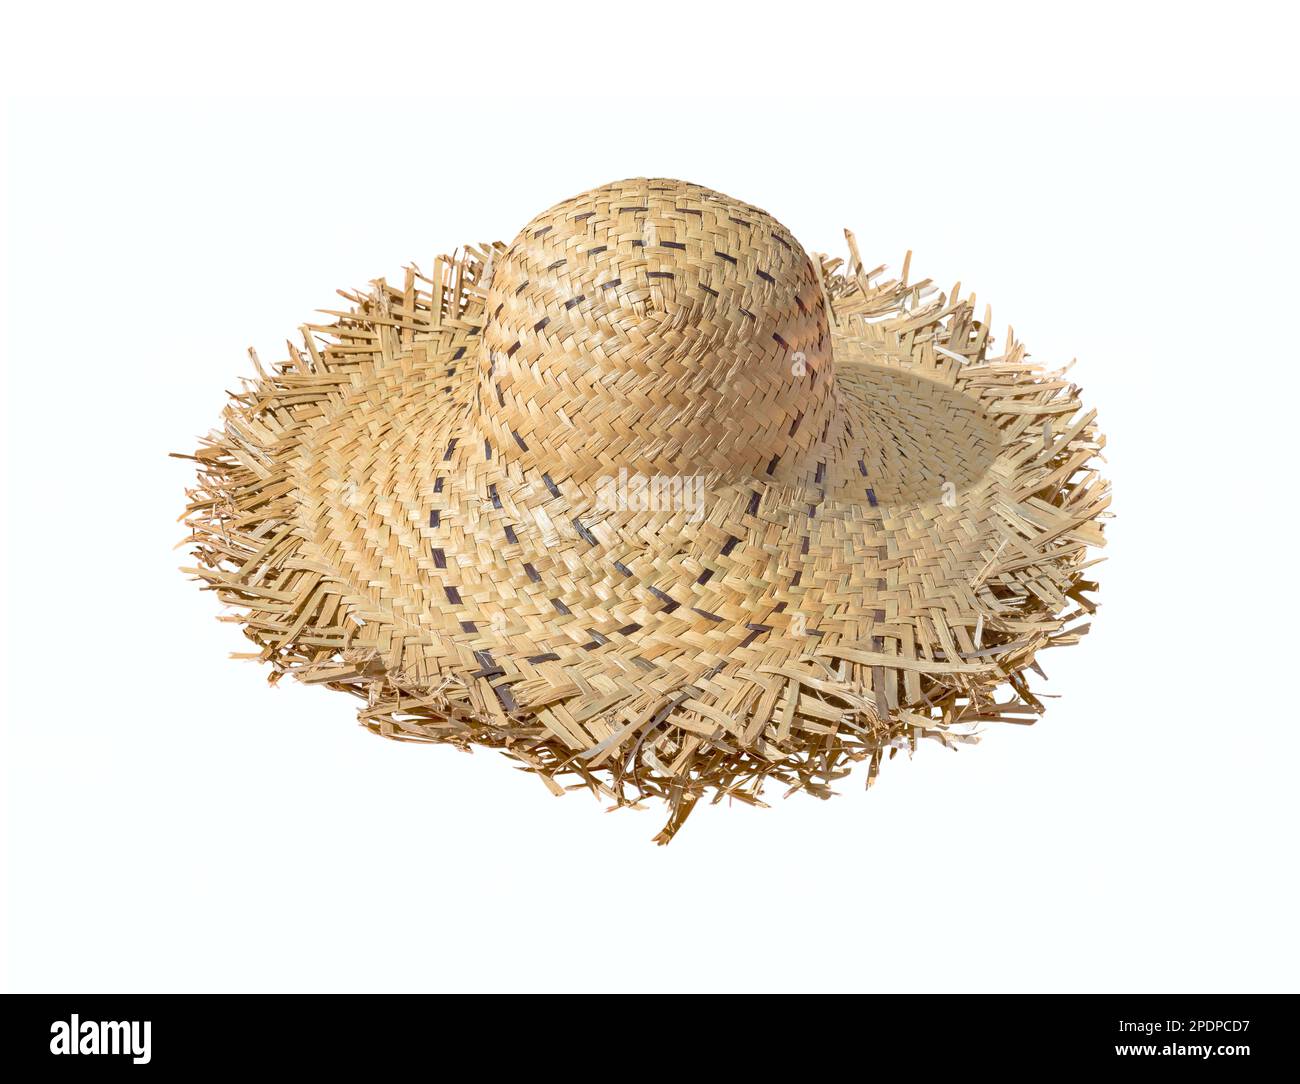 https://c8.alamy.com/comp/2PDPCD7/straw-female-hat-with-black-ribbon-isolated-on-white-background-2PDPCD7.jpg